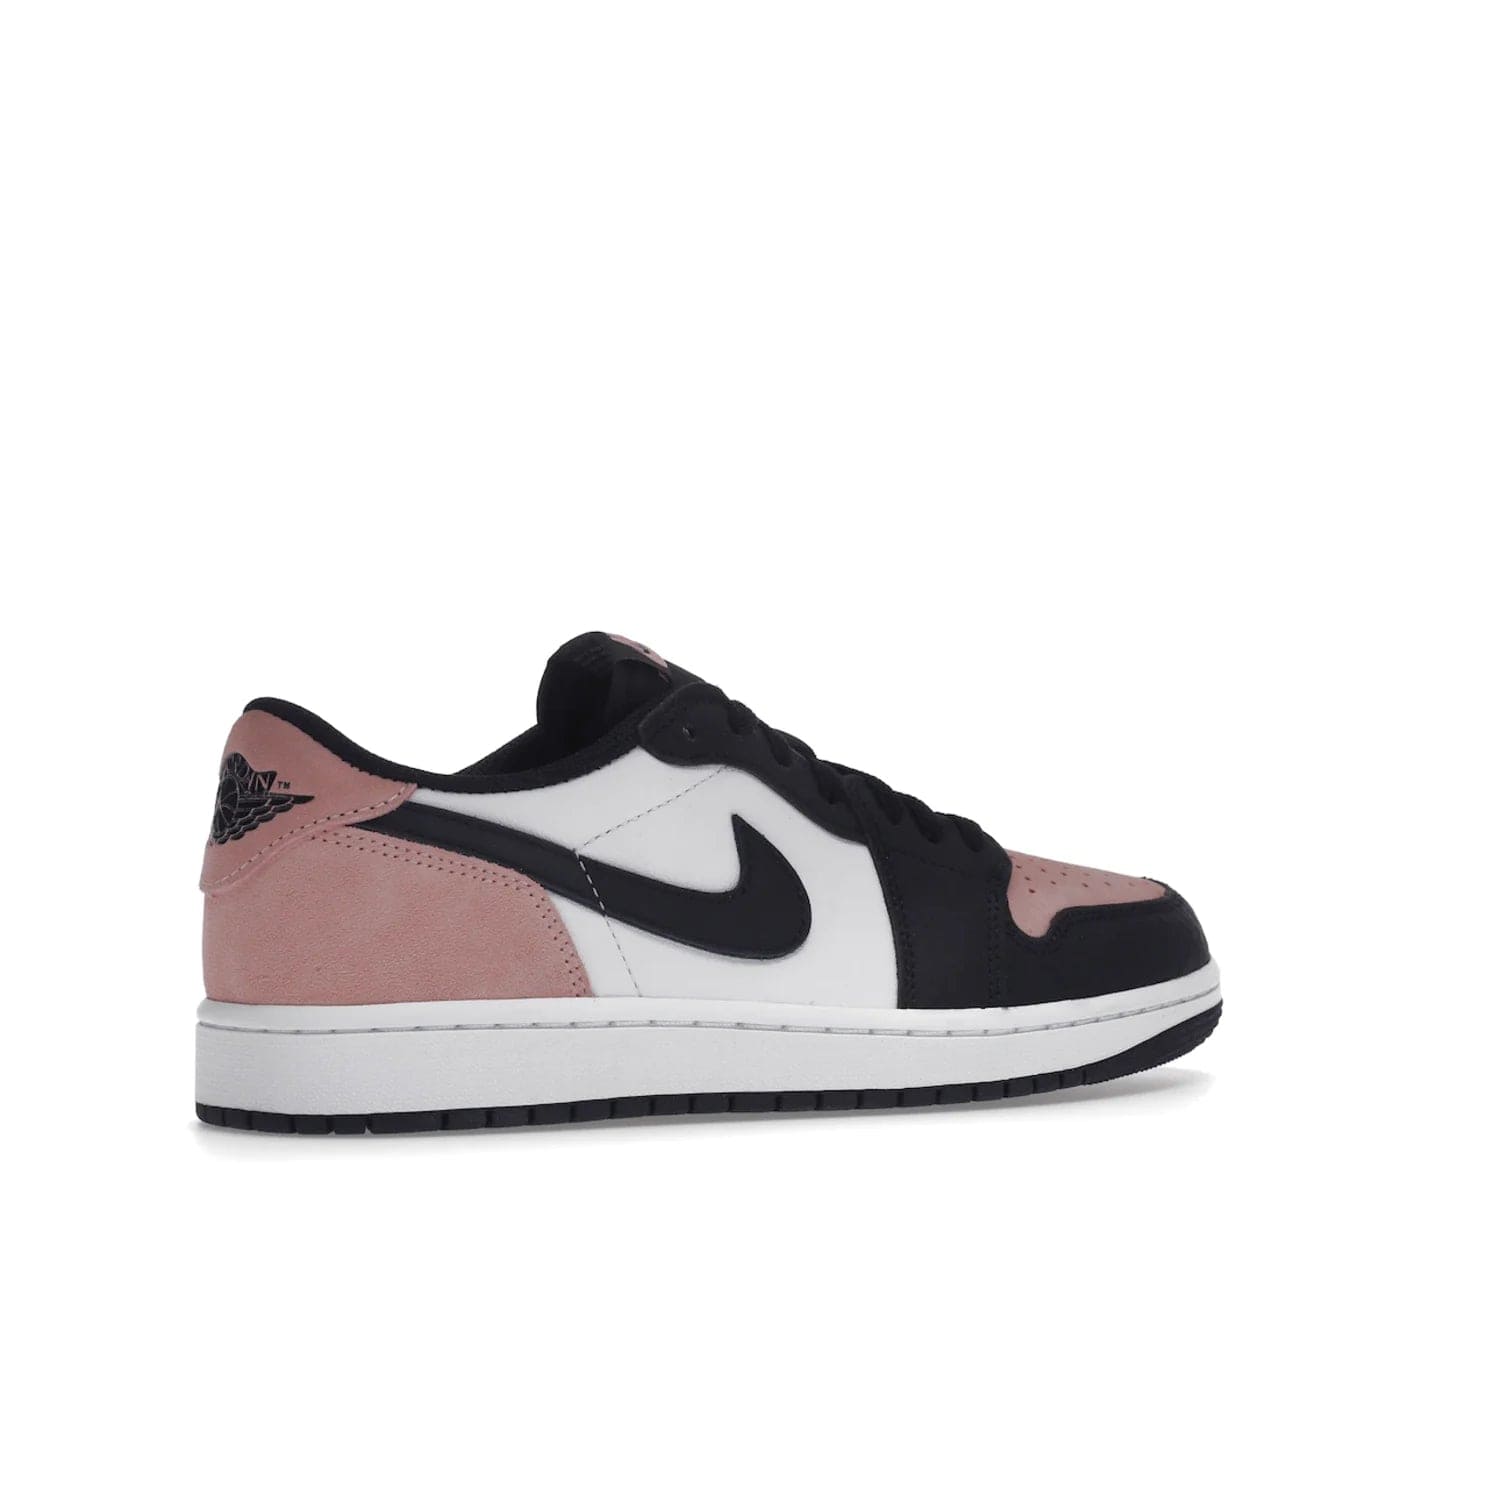 Jordan 1 Low OG Bleached Coral - Image 34 - Only at www.BallersClubKickz.com - Introducing the Air Jordan 1 Low OG Bleached Coral. Constructed with white leather, black cracked leather & Bleached Coral suede. Signature Jordan Wings logo, white Air sole. Get the pack in July 2022 and stand out.